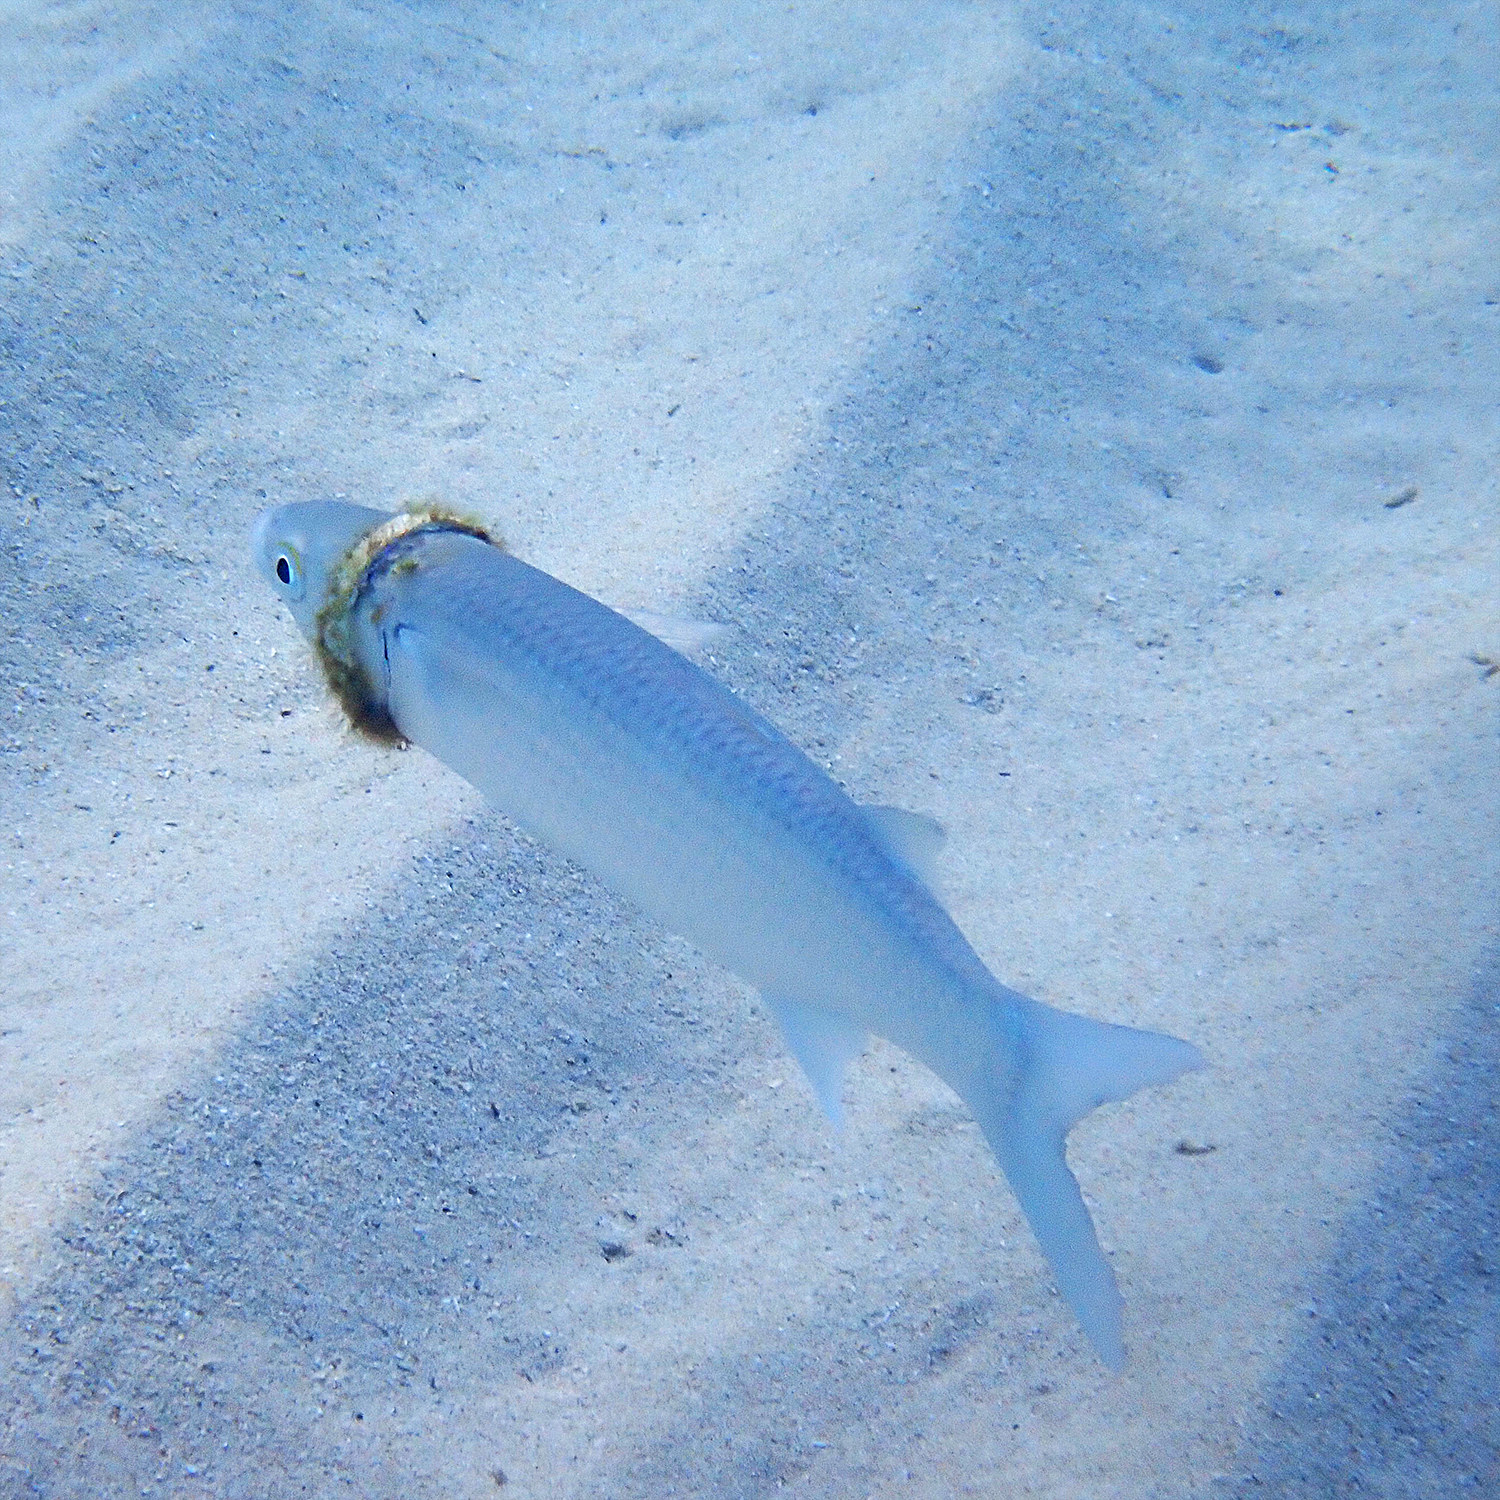 A mullet fish with a plastic ring wrapped around its body